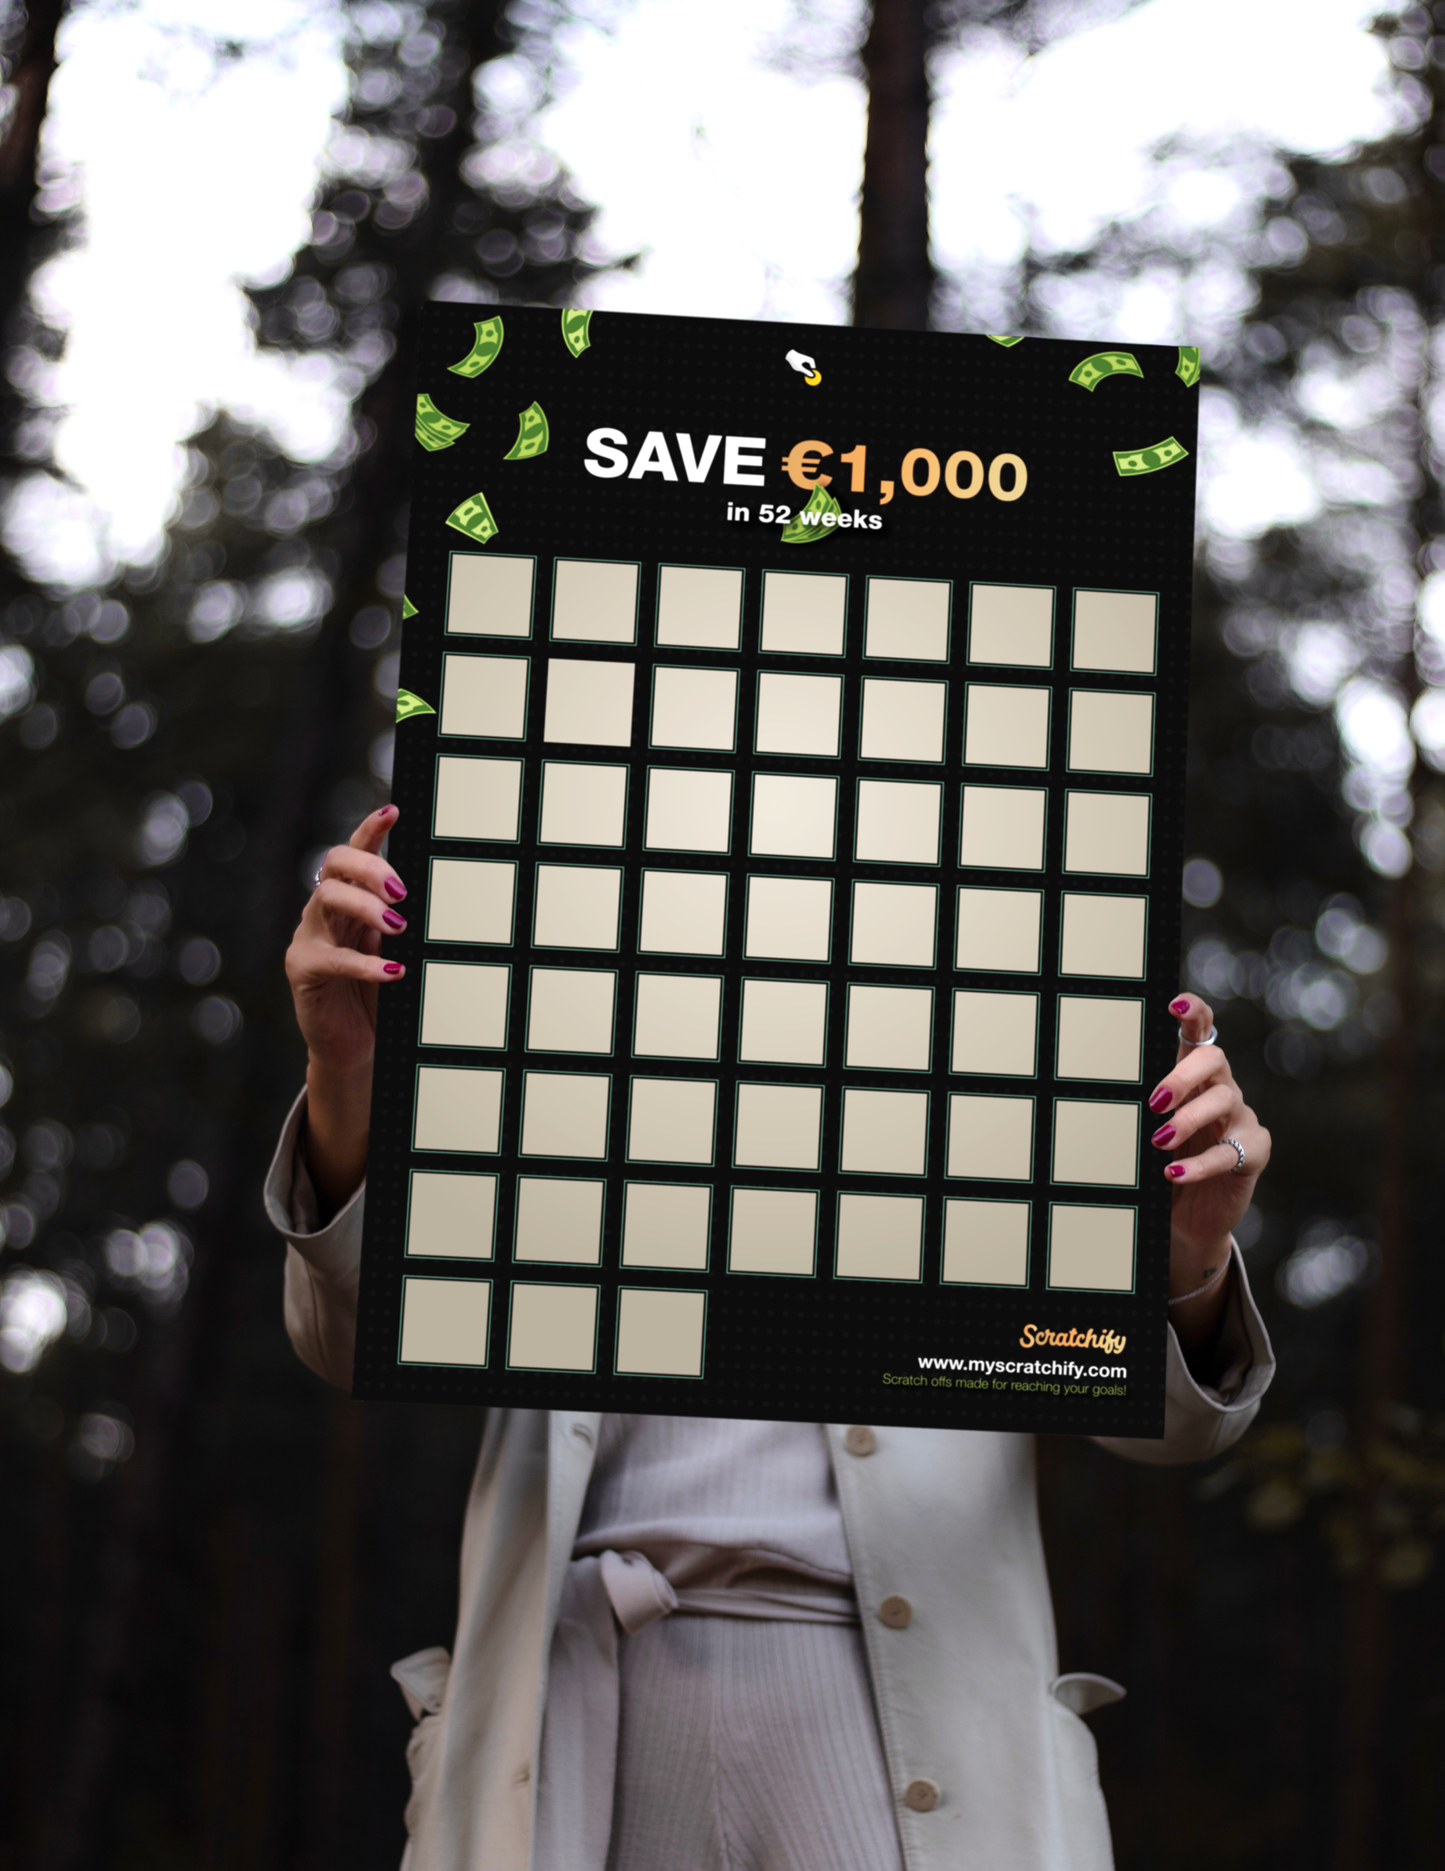 Scratch Off Poster for saving money, if you ever wonder - How to Save money then this is your solution! Easiest way to save money, with our scratch off poster you will save 1000 in 1 year. This is a fun and realistic way to save money, scratch off poster is best solution for saving money!